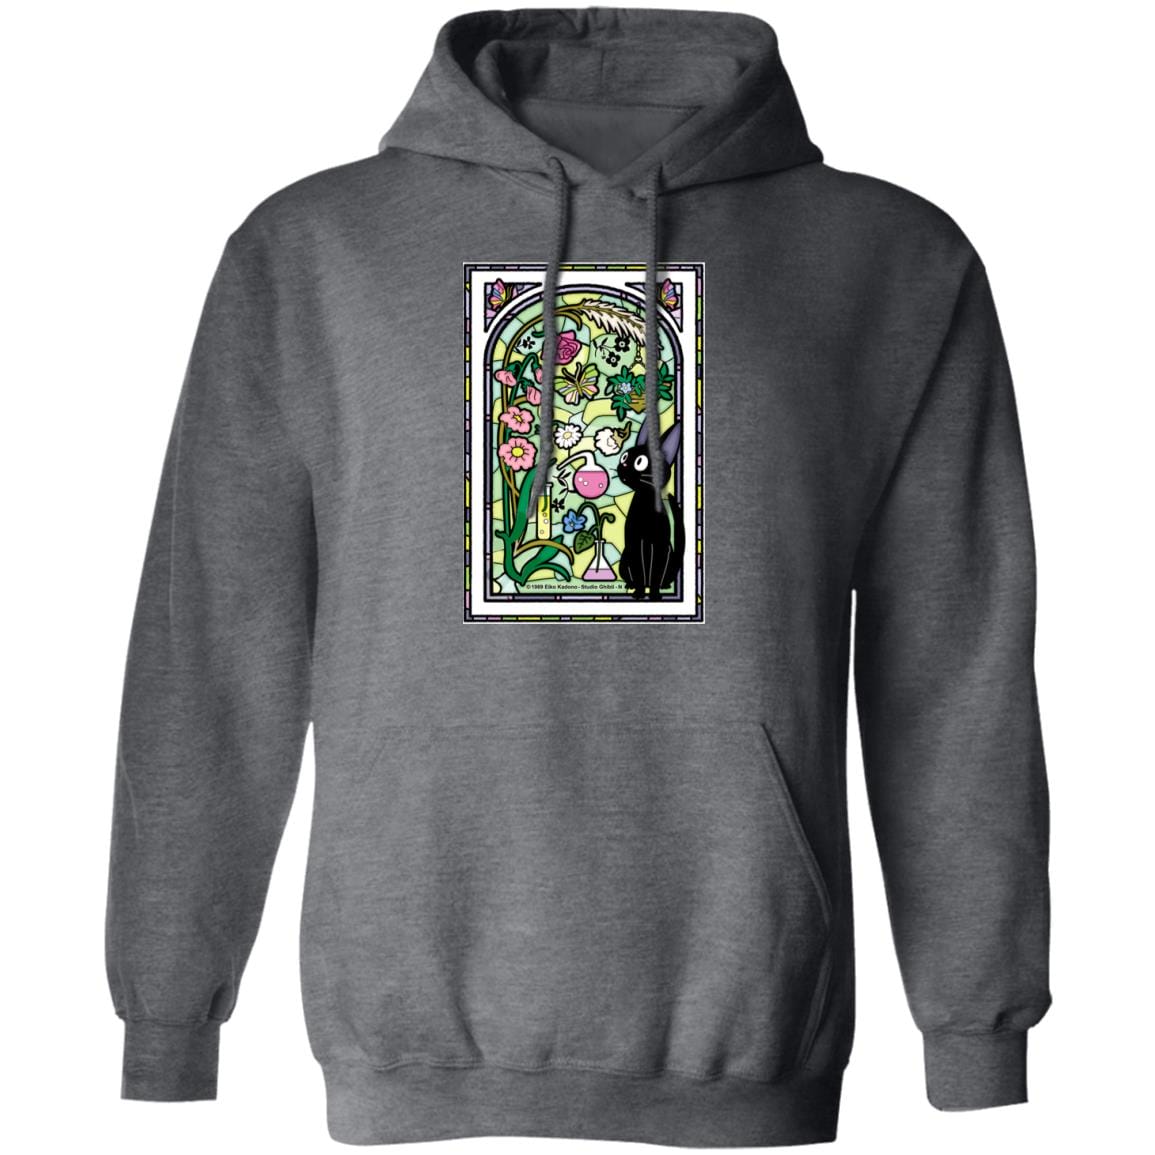 Jiji by the Stained Glass Window Hoodie